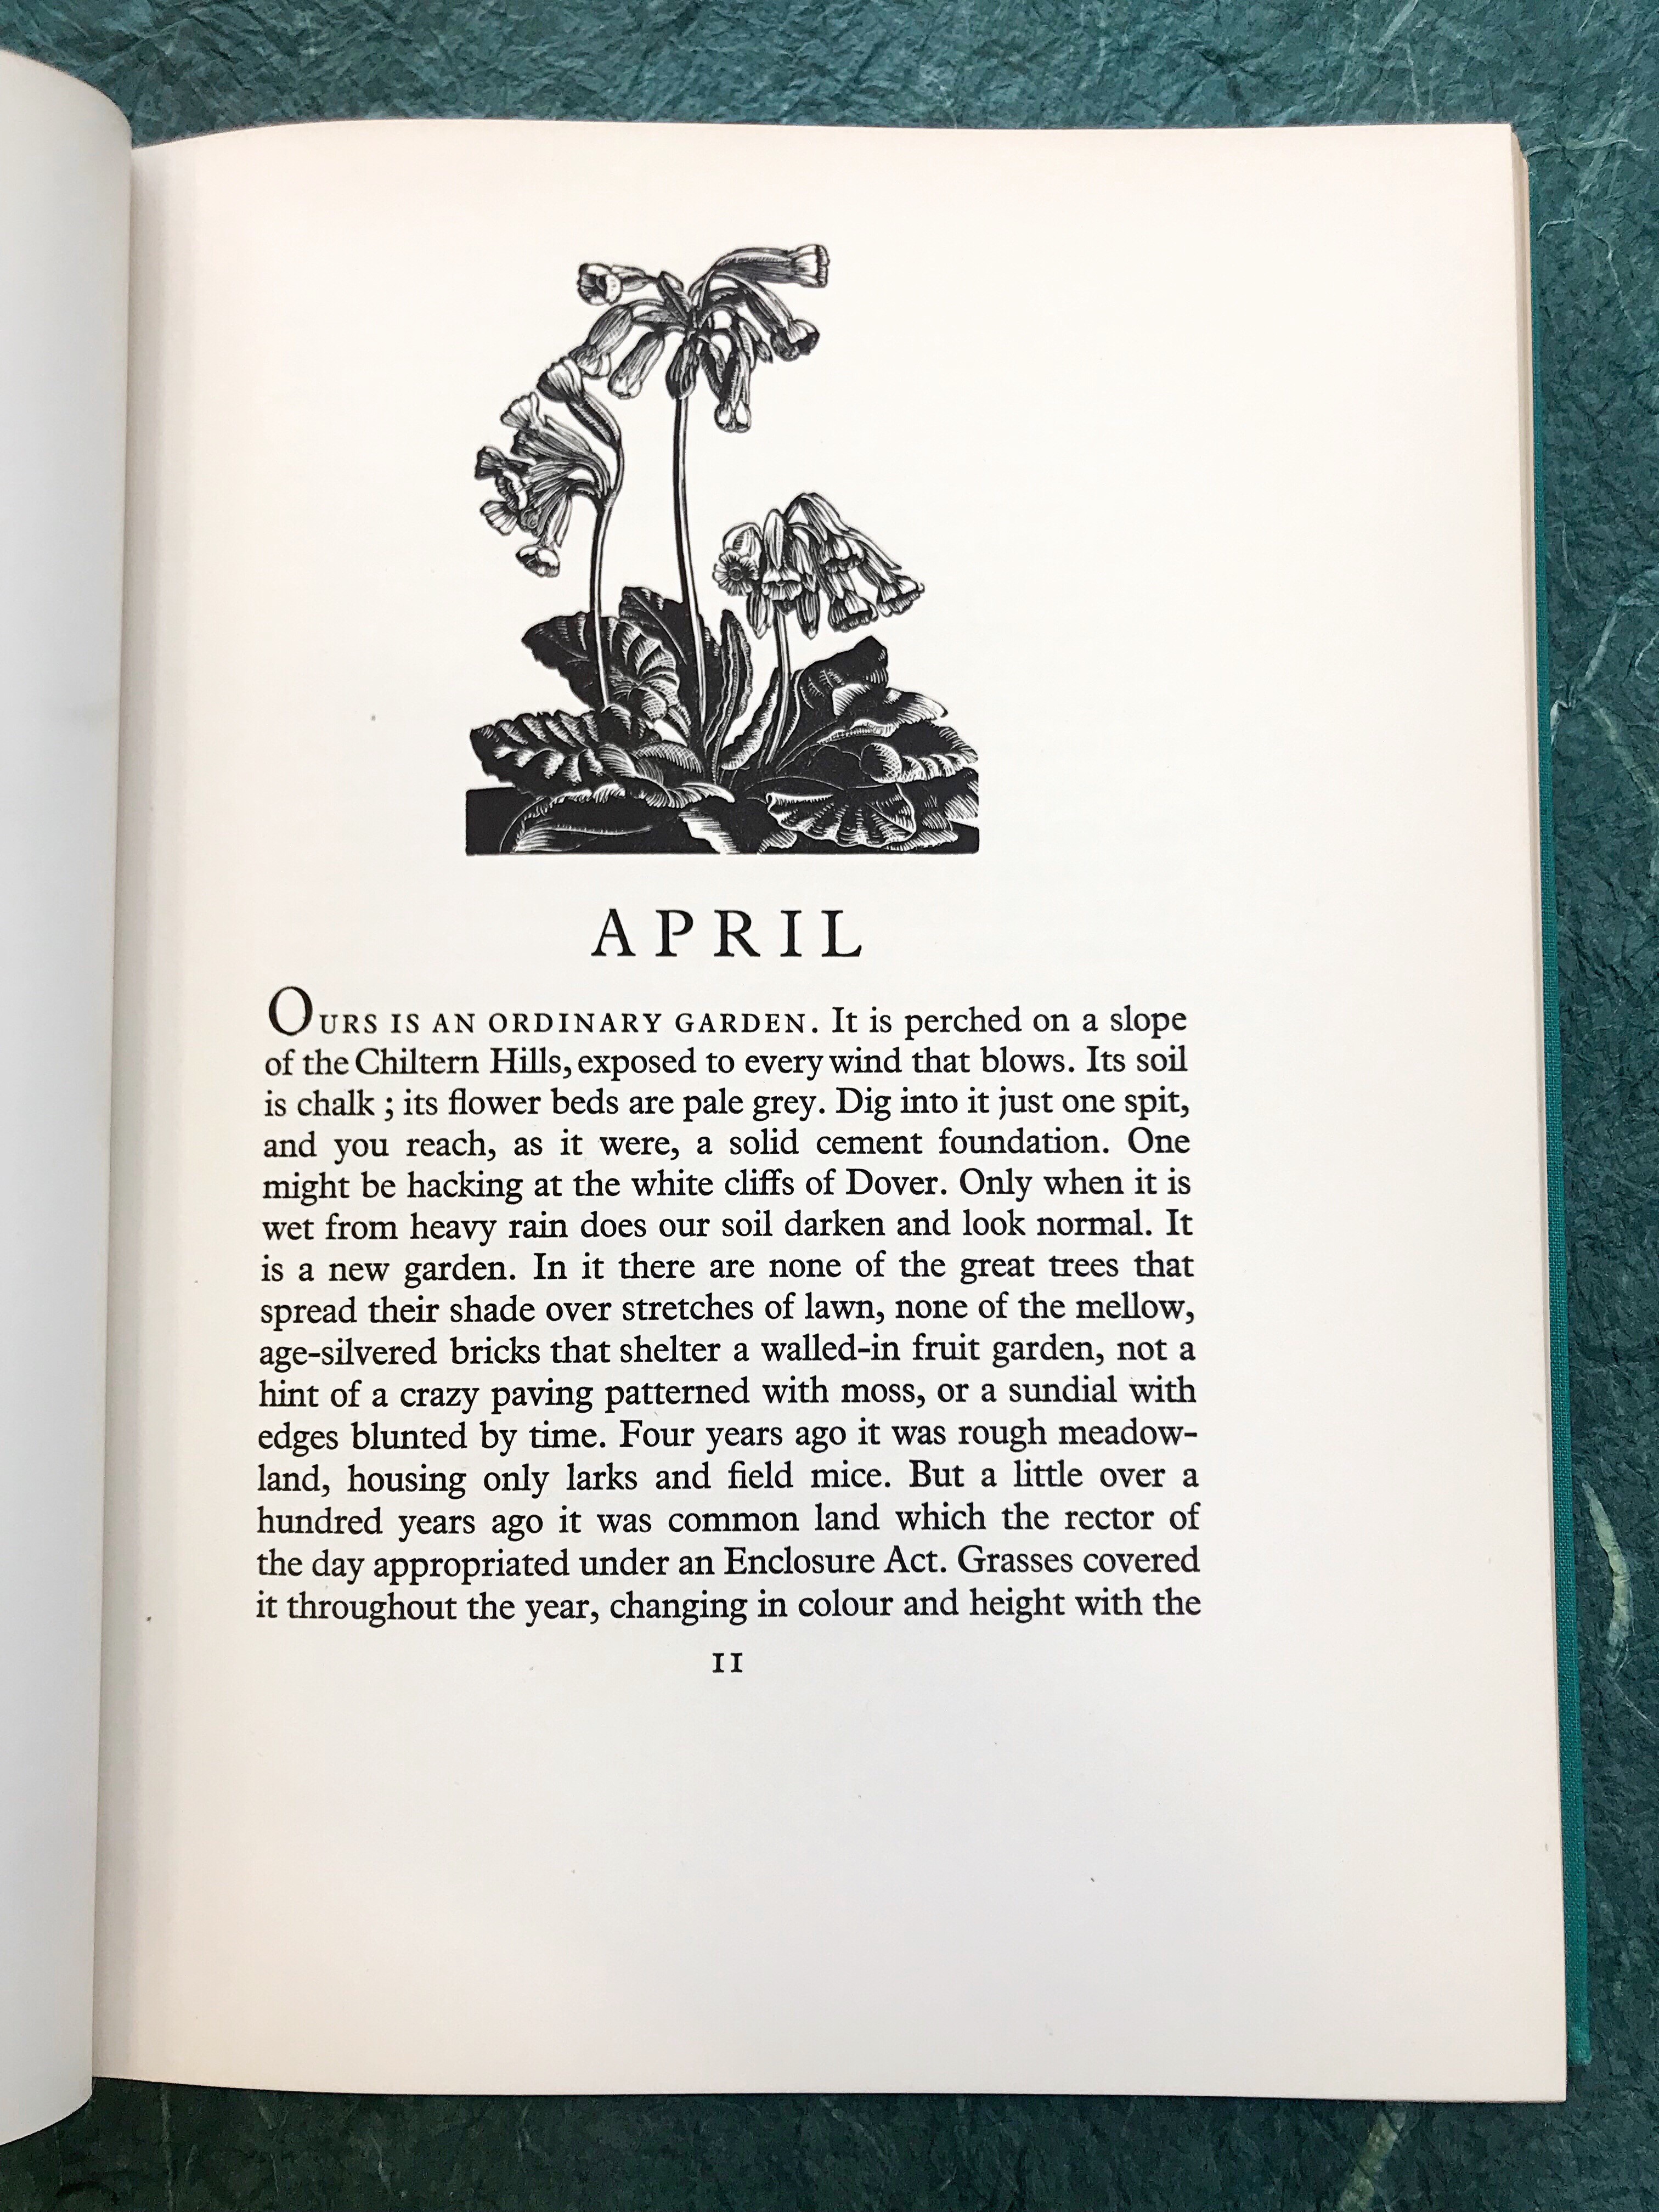 page from The Farmer’s Year by Clare Leighton with an illustration of a flower